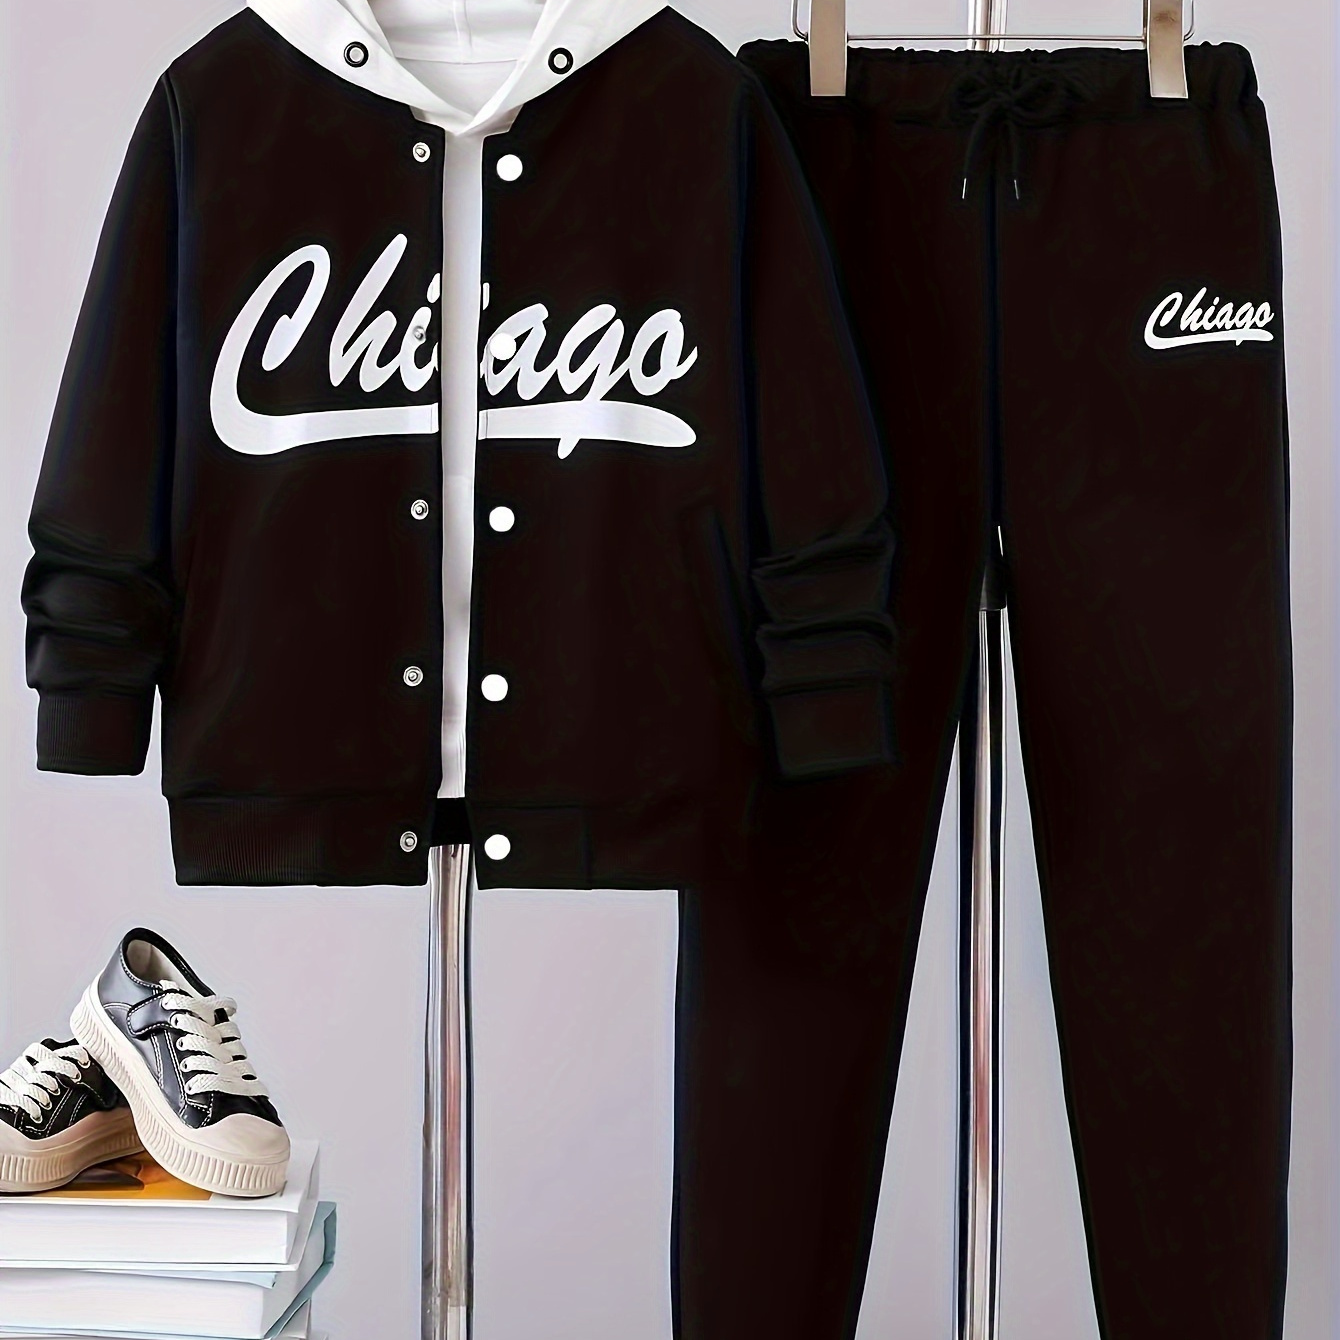 

2pcs Boy's "chicago" Letter Print Varsity Jacket Outfit, Button Front Bomber Jacket & Pants Set, Kid's Clothes For Fall Winter, As Gift